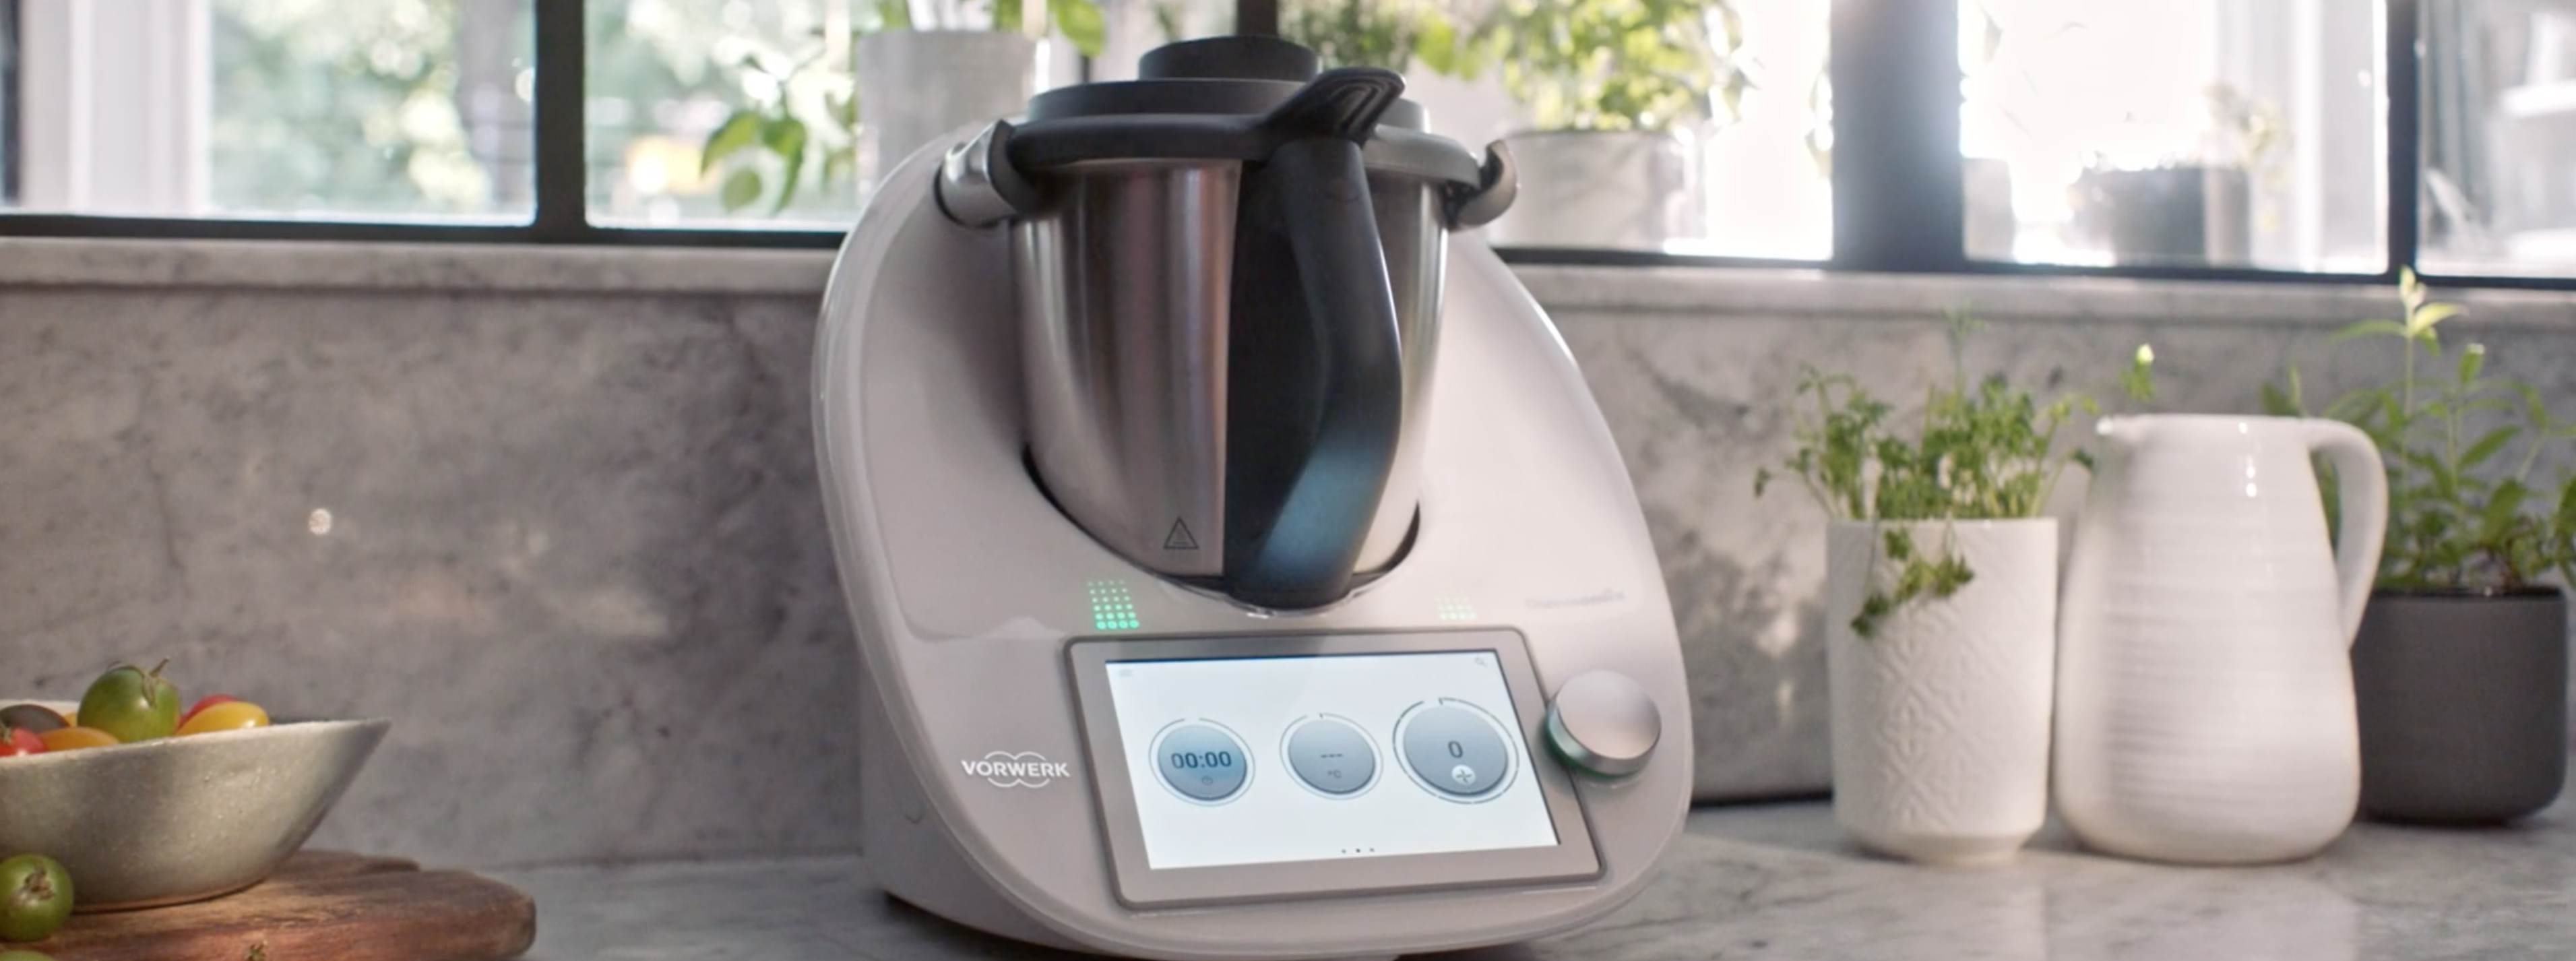 UID, UX Design for Thermomix